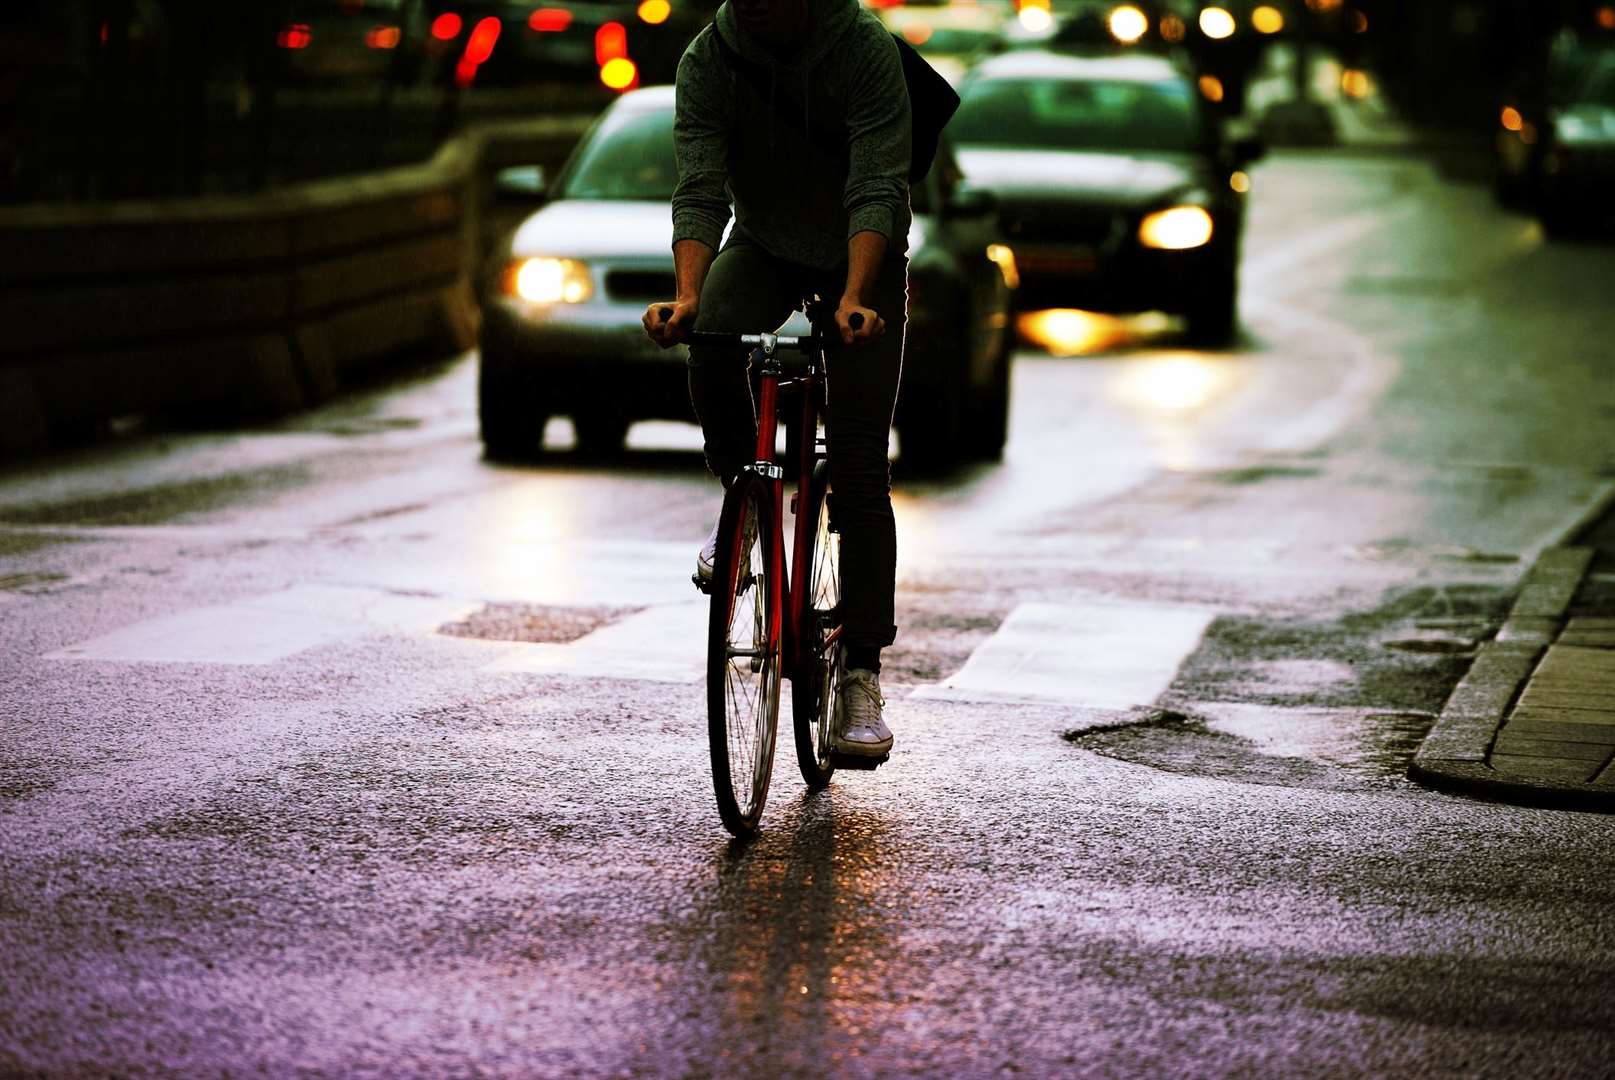 Cycling UK says HGVs are involved in a disproportionate number of road incidents. Image: iStock.